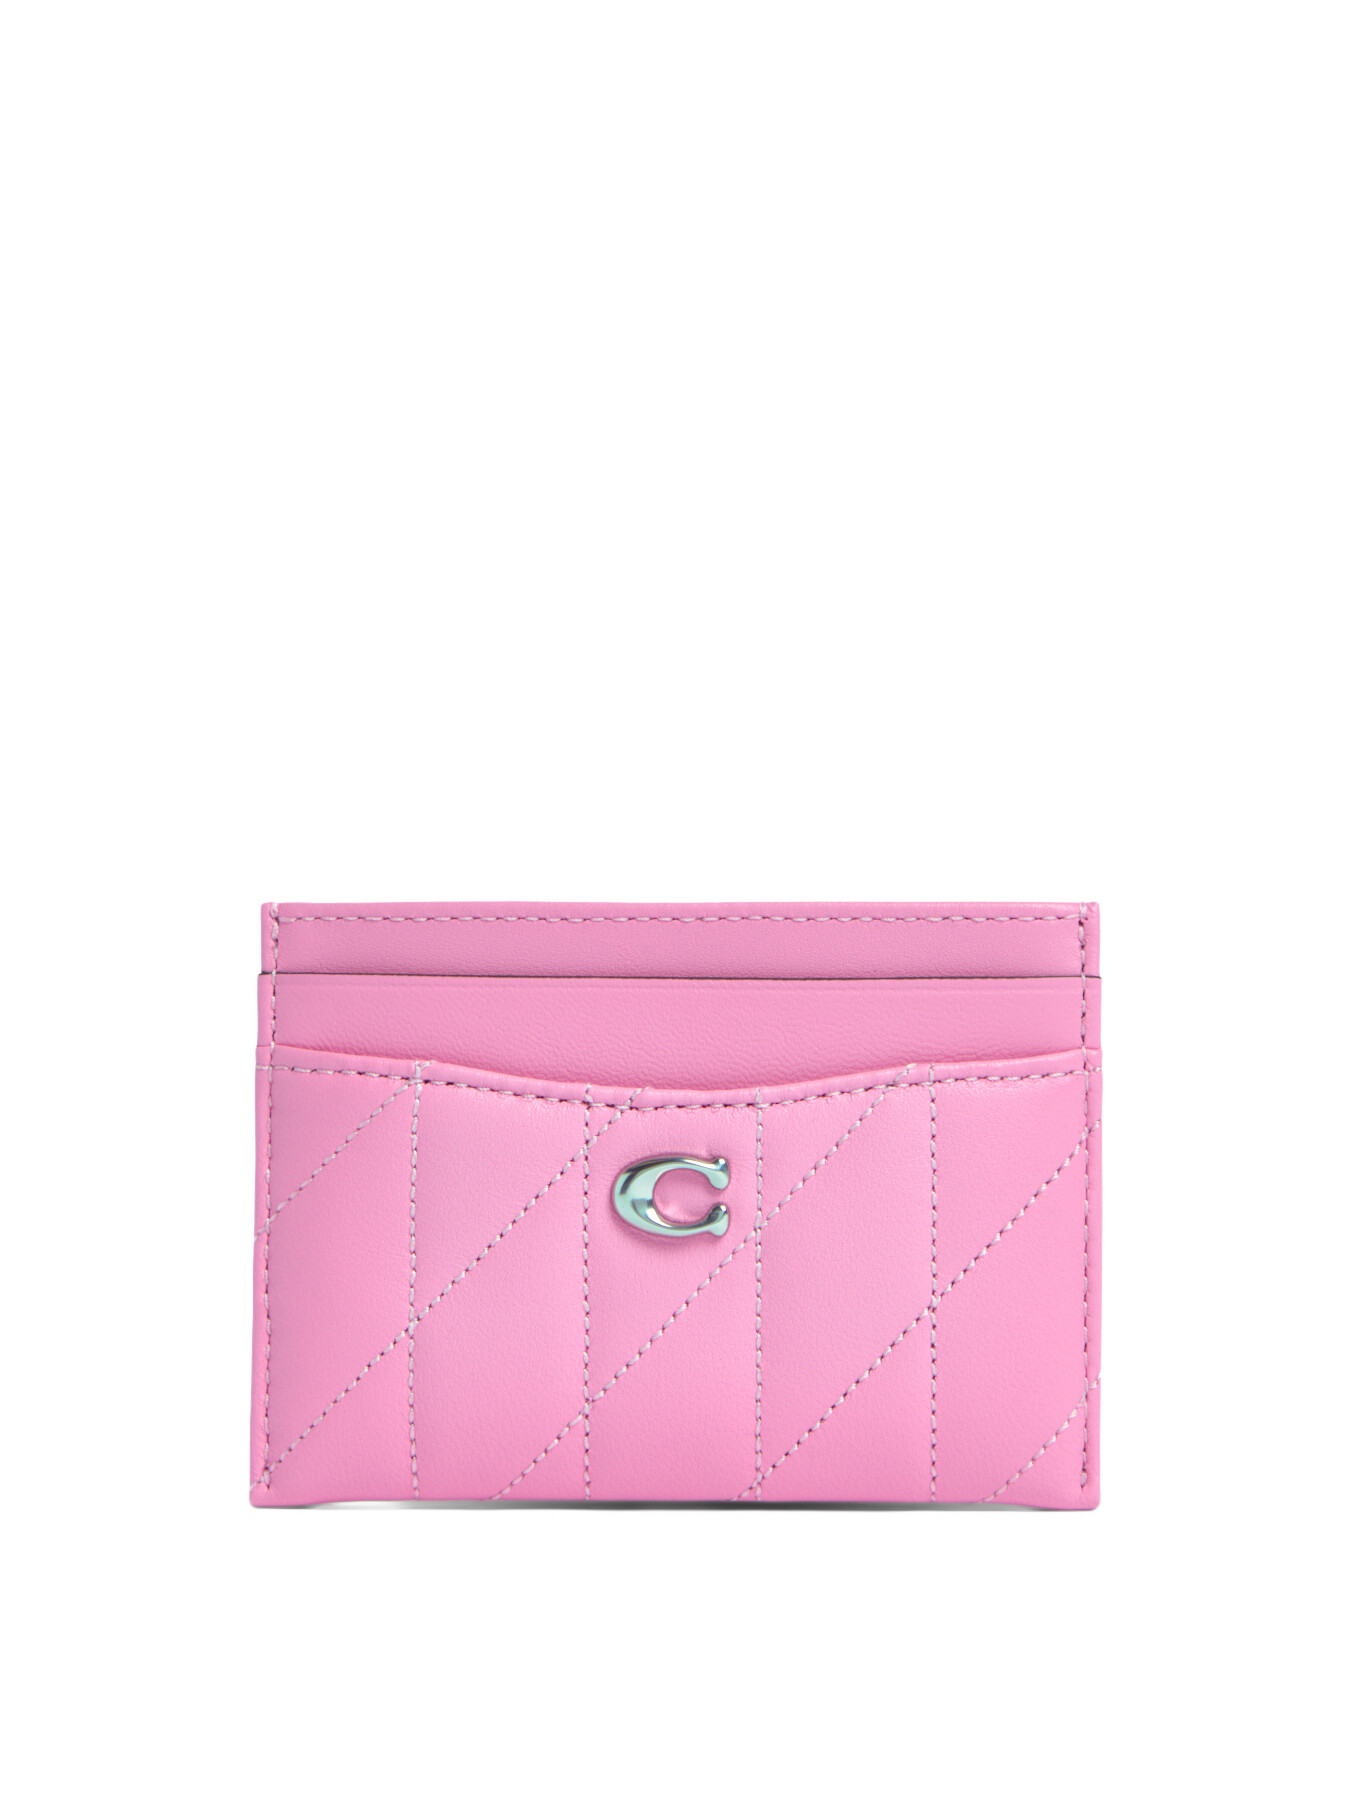 Coach Women's Card Case Quilted Pink